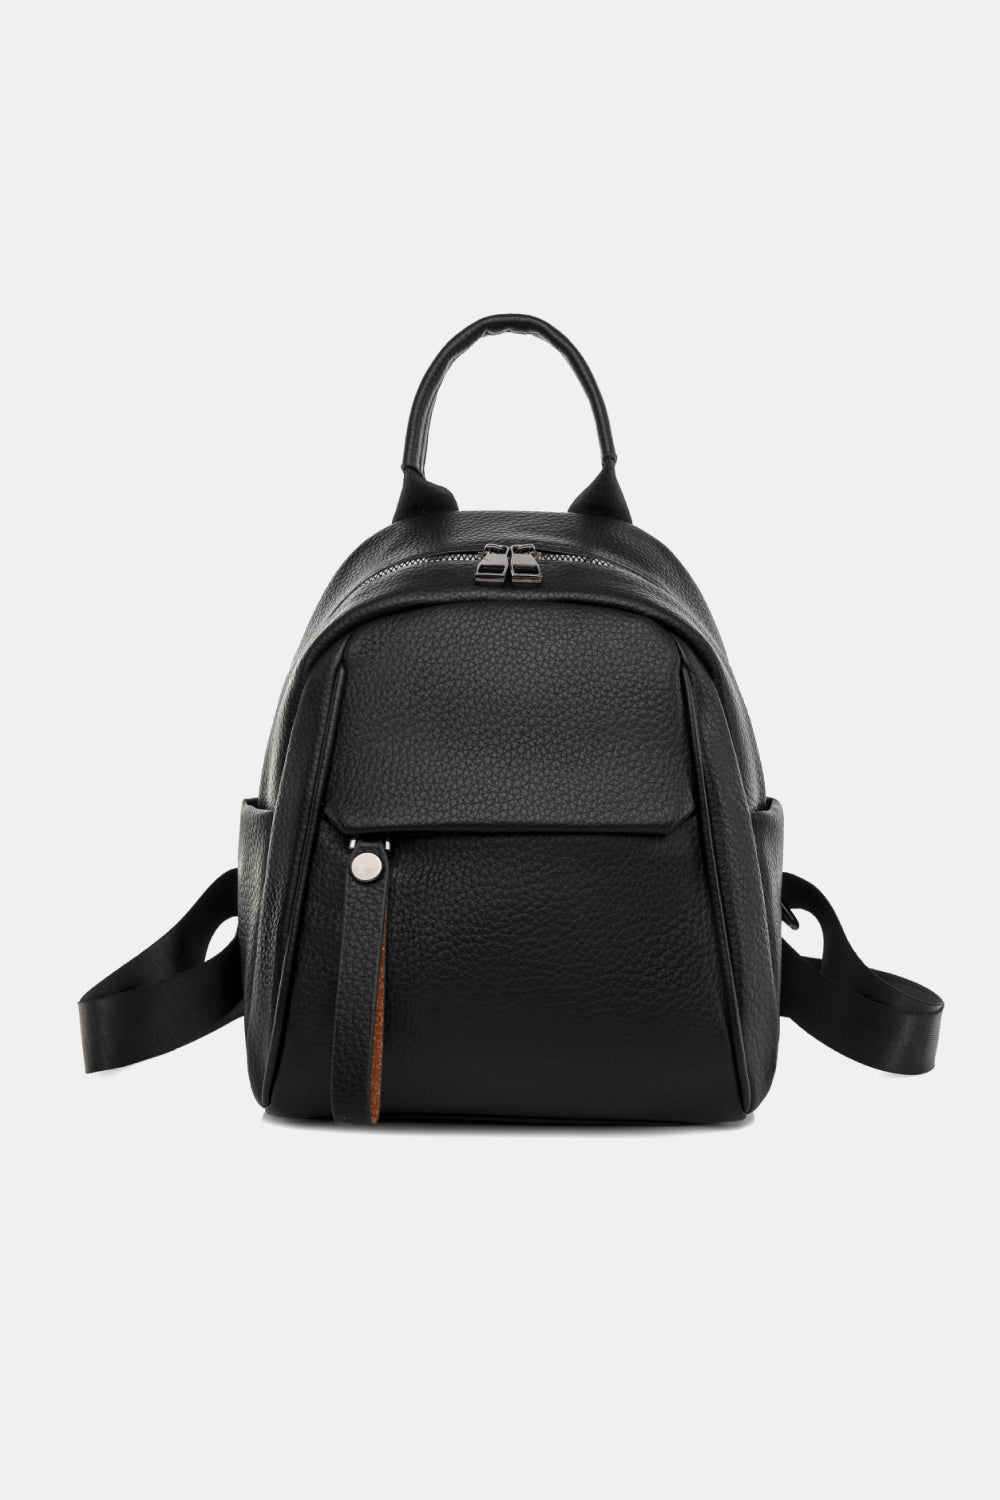 Small PU Leather Backpack - Handbag - FITGGINS